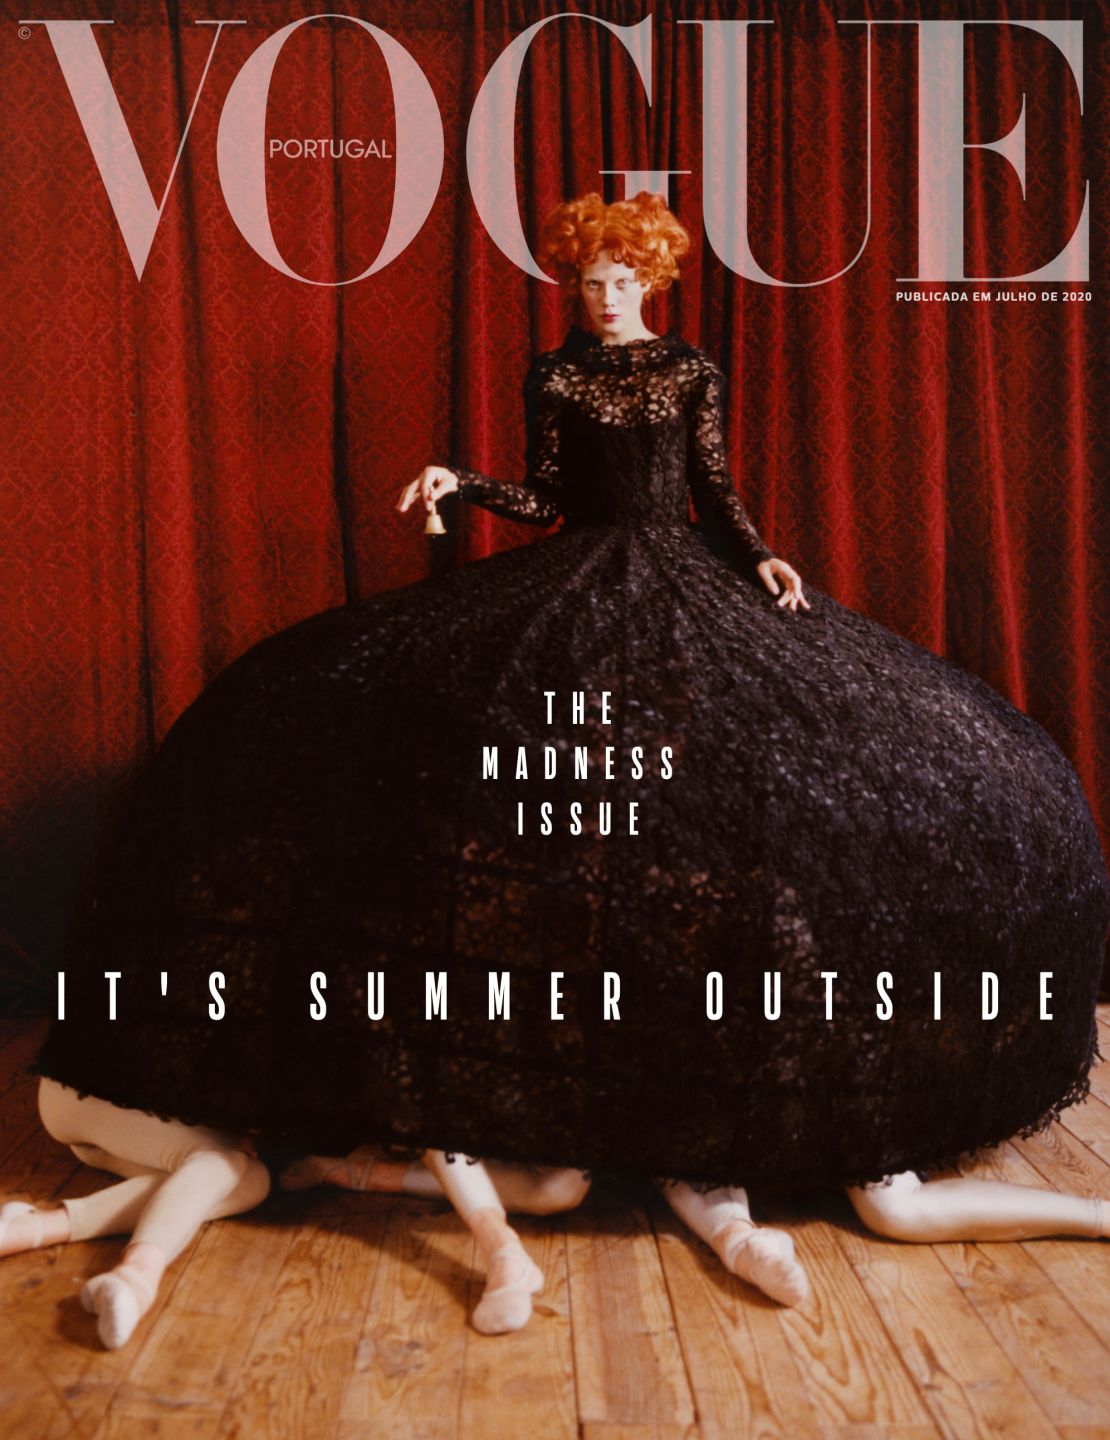 One of the covers from Vogue Portugal's "Madness" issue